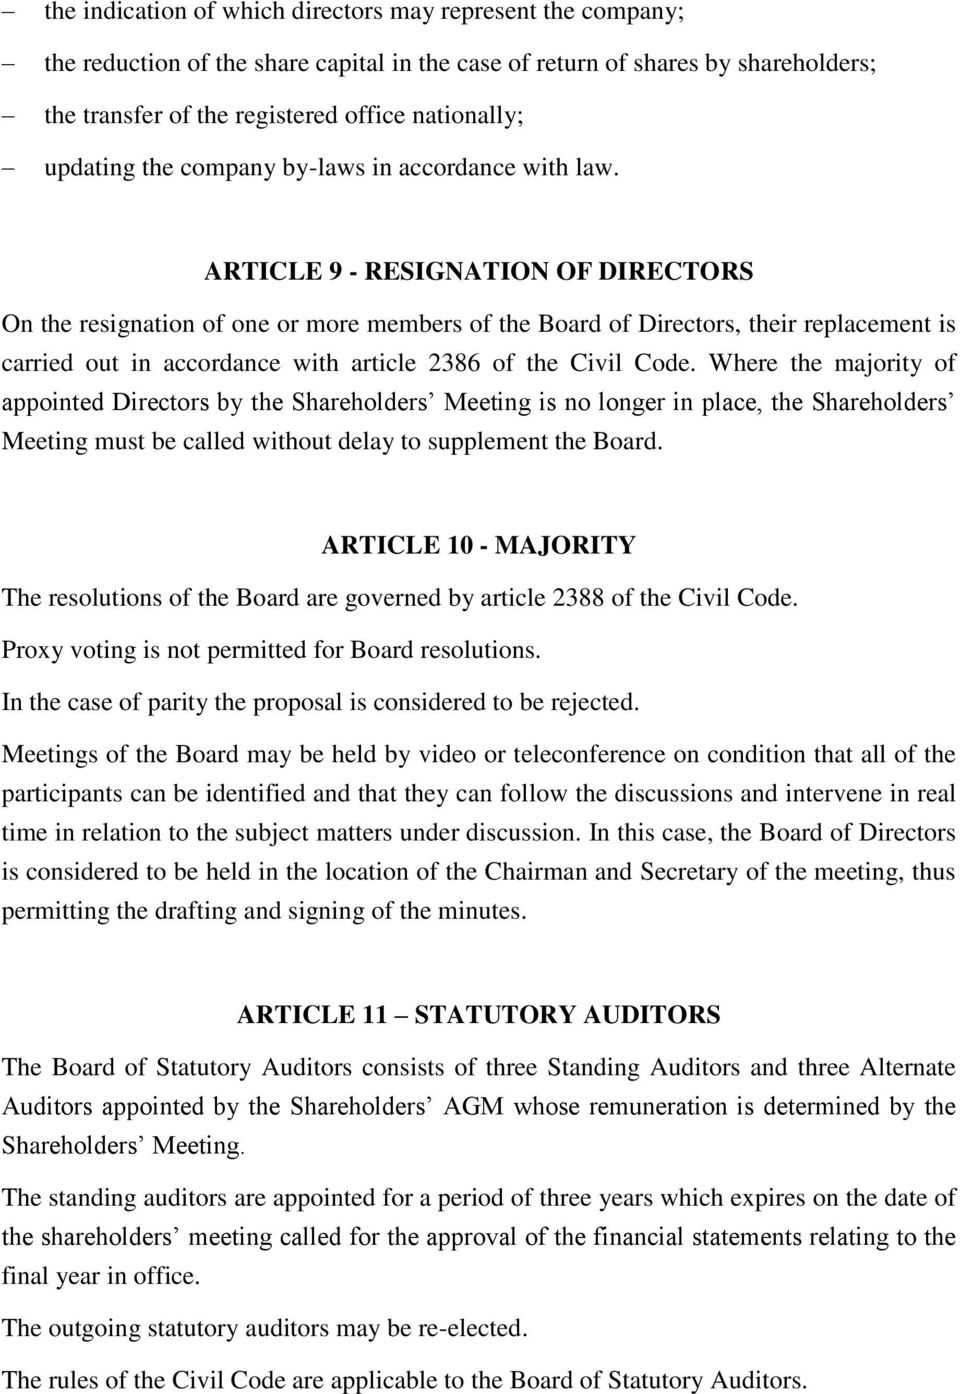 ARTICLE 9 - RESIGNATION OF DIRECTORS On the resignation of one or more members of the Board of Directors, their replacement is carried out in accordance with article 2386 of the Civil Code.